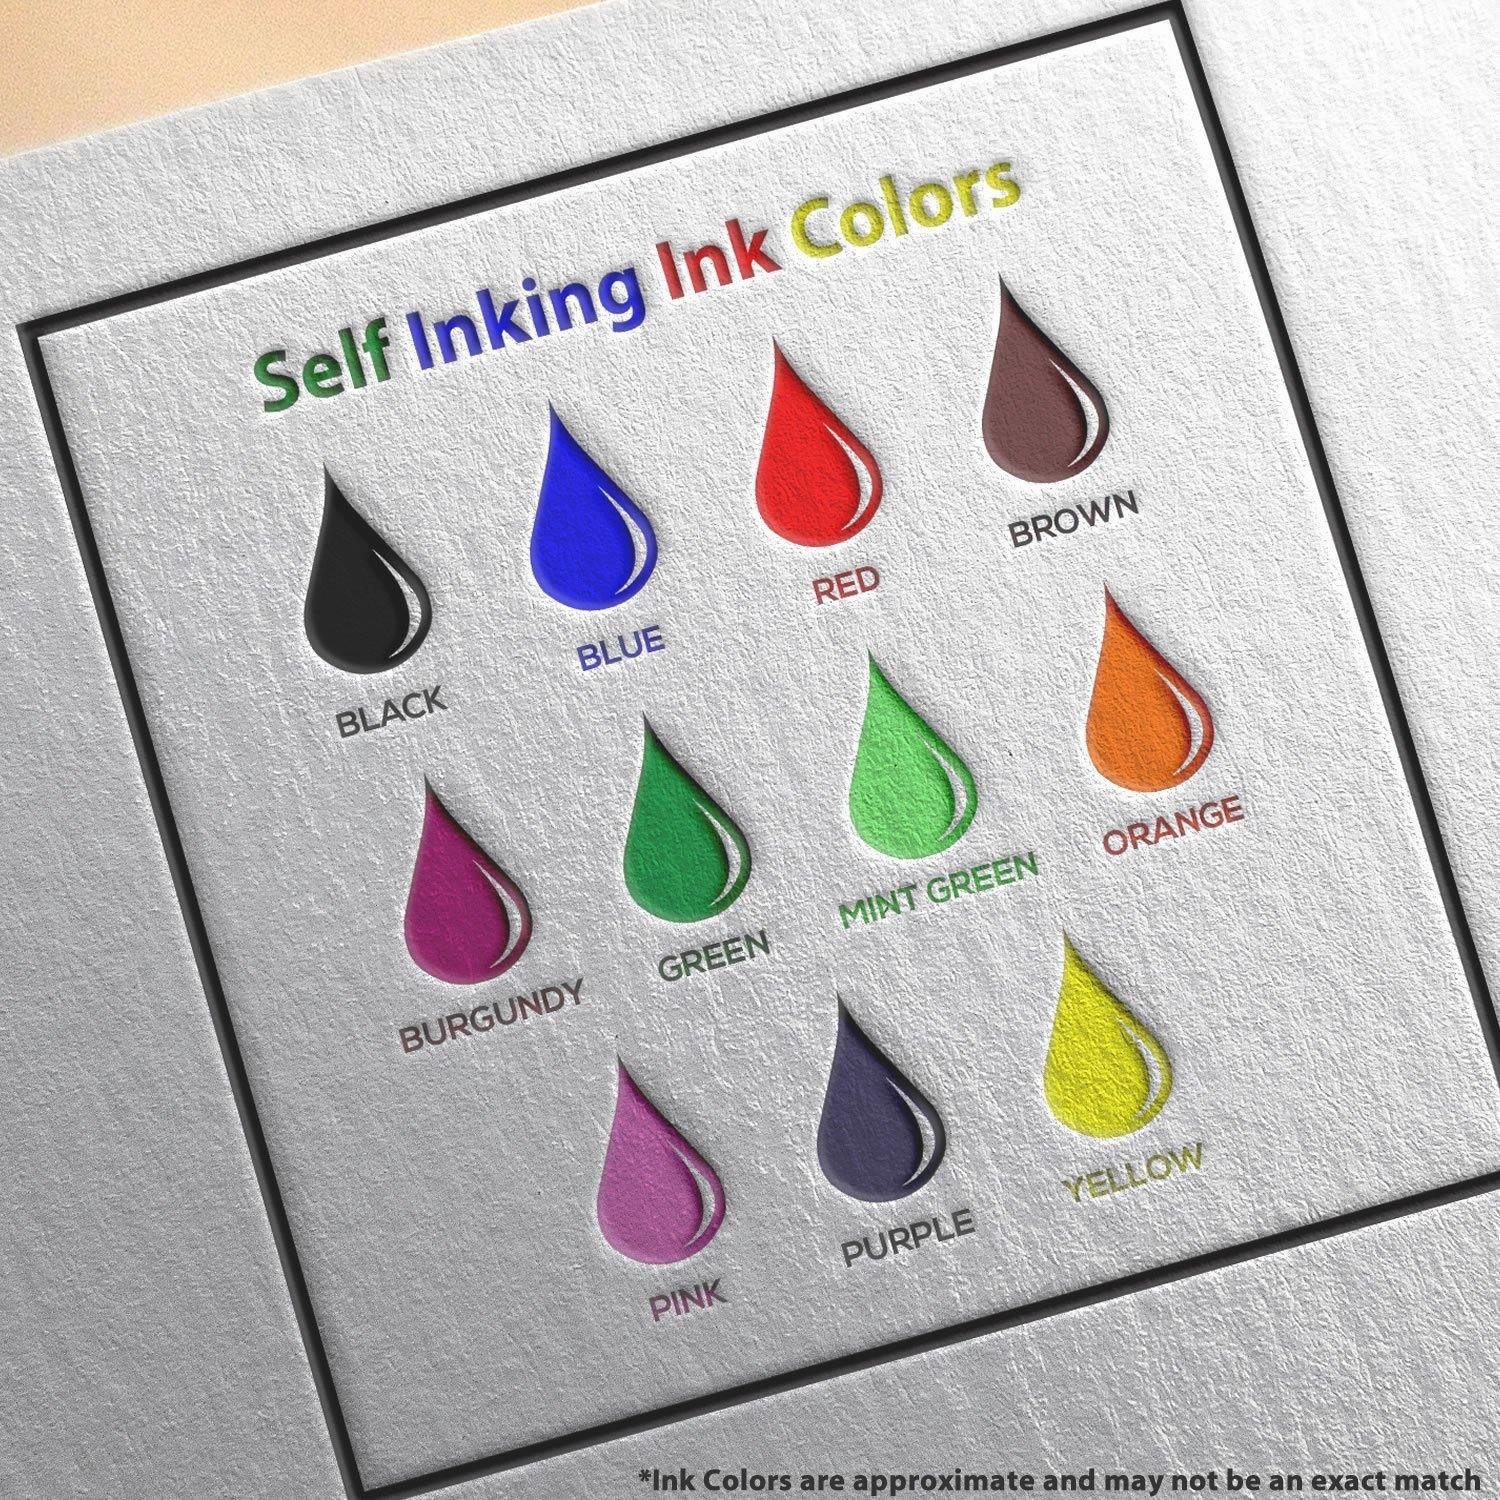 Self-Inking Courtesy Copy Original Filed Electronically Stamp - Engineer Seal Stamps - Brand_Trodat, Impression Size_Small, Stamp Type_Self-Inking Stamp, Type of Use_Business, Type of Use_Office